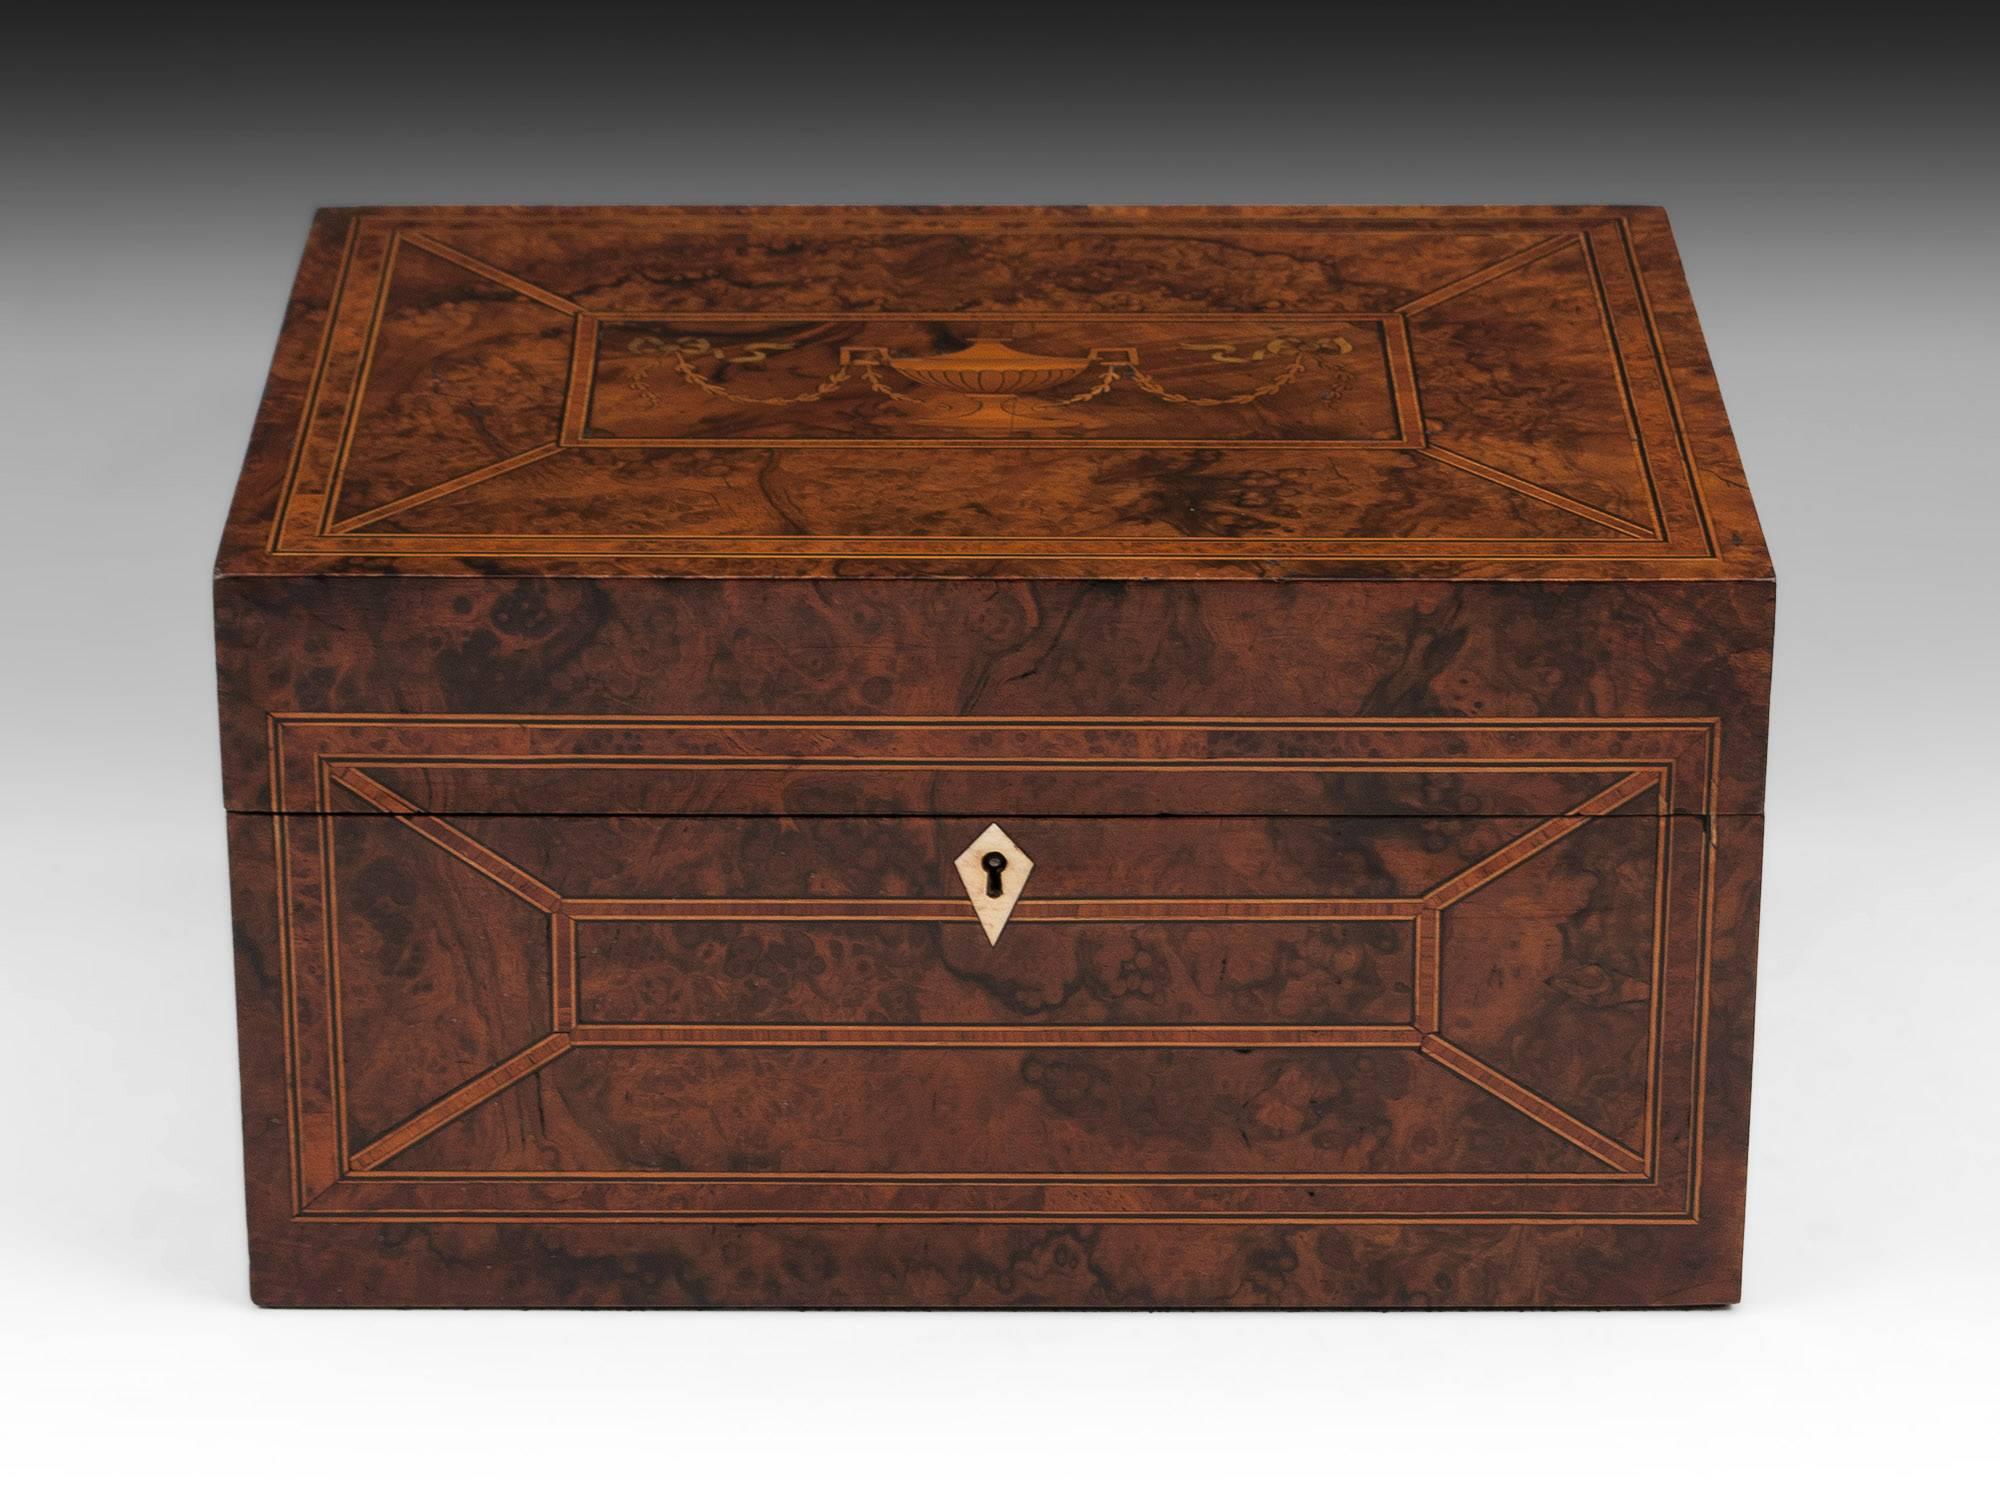 Antique burr walnut Jewelry box with decorative tulipwood crossbanding divided by ebony and boxwood stringing, as well has each panel being framed with Amboyna inlay. The top is adorned with a beautiful inlaid Robert Adam style urn with floral